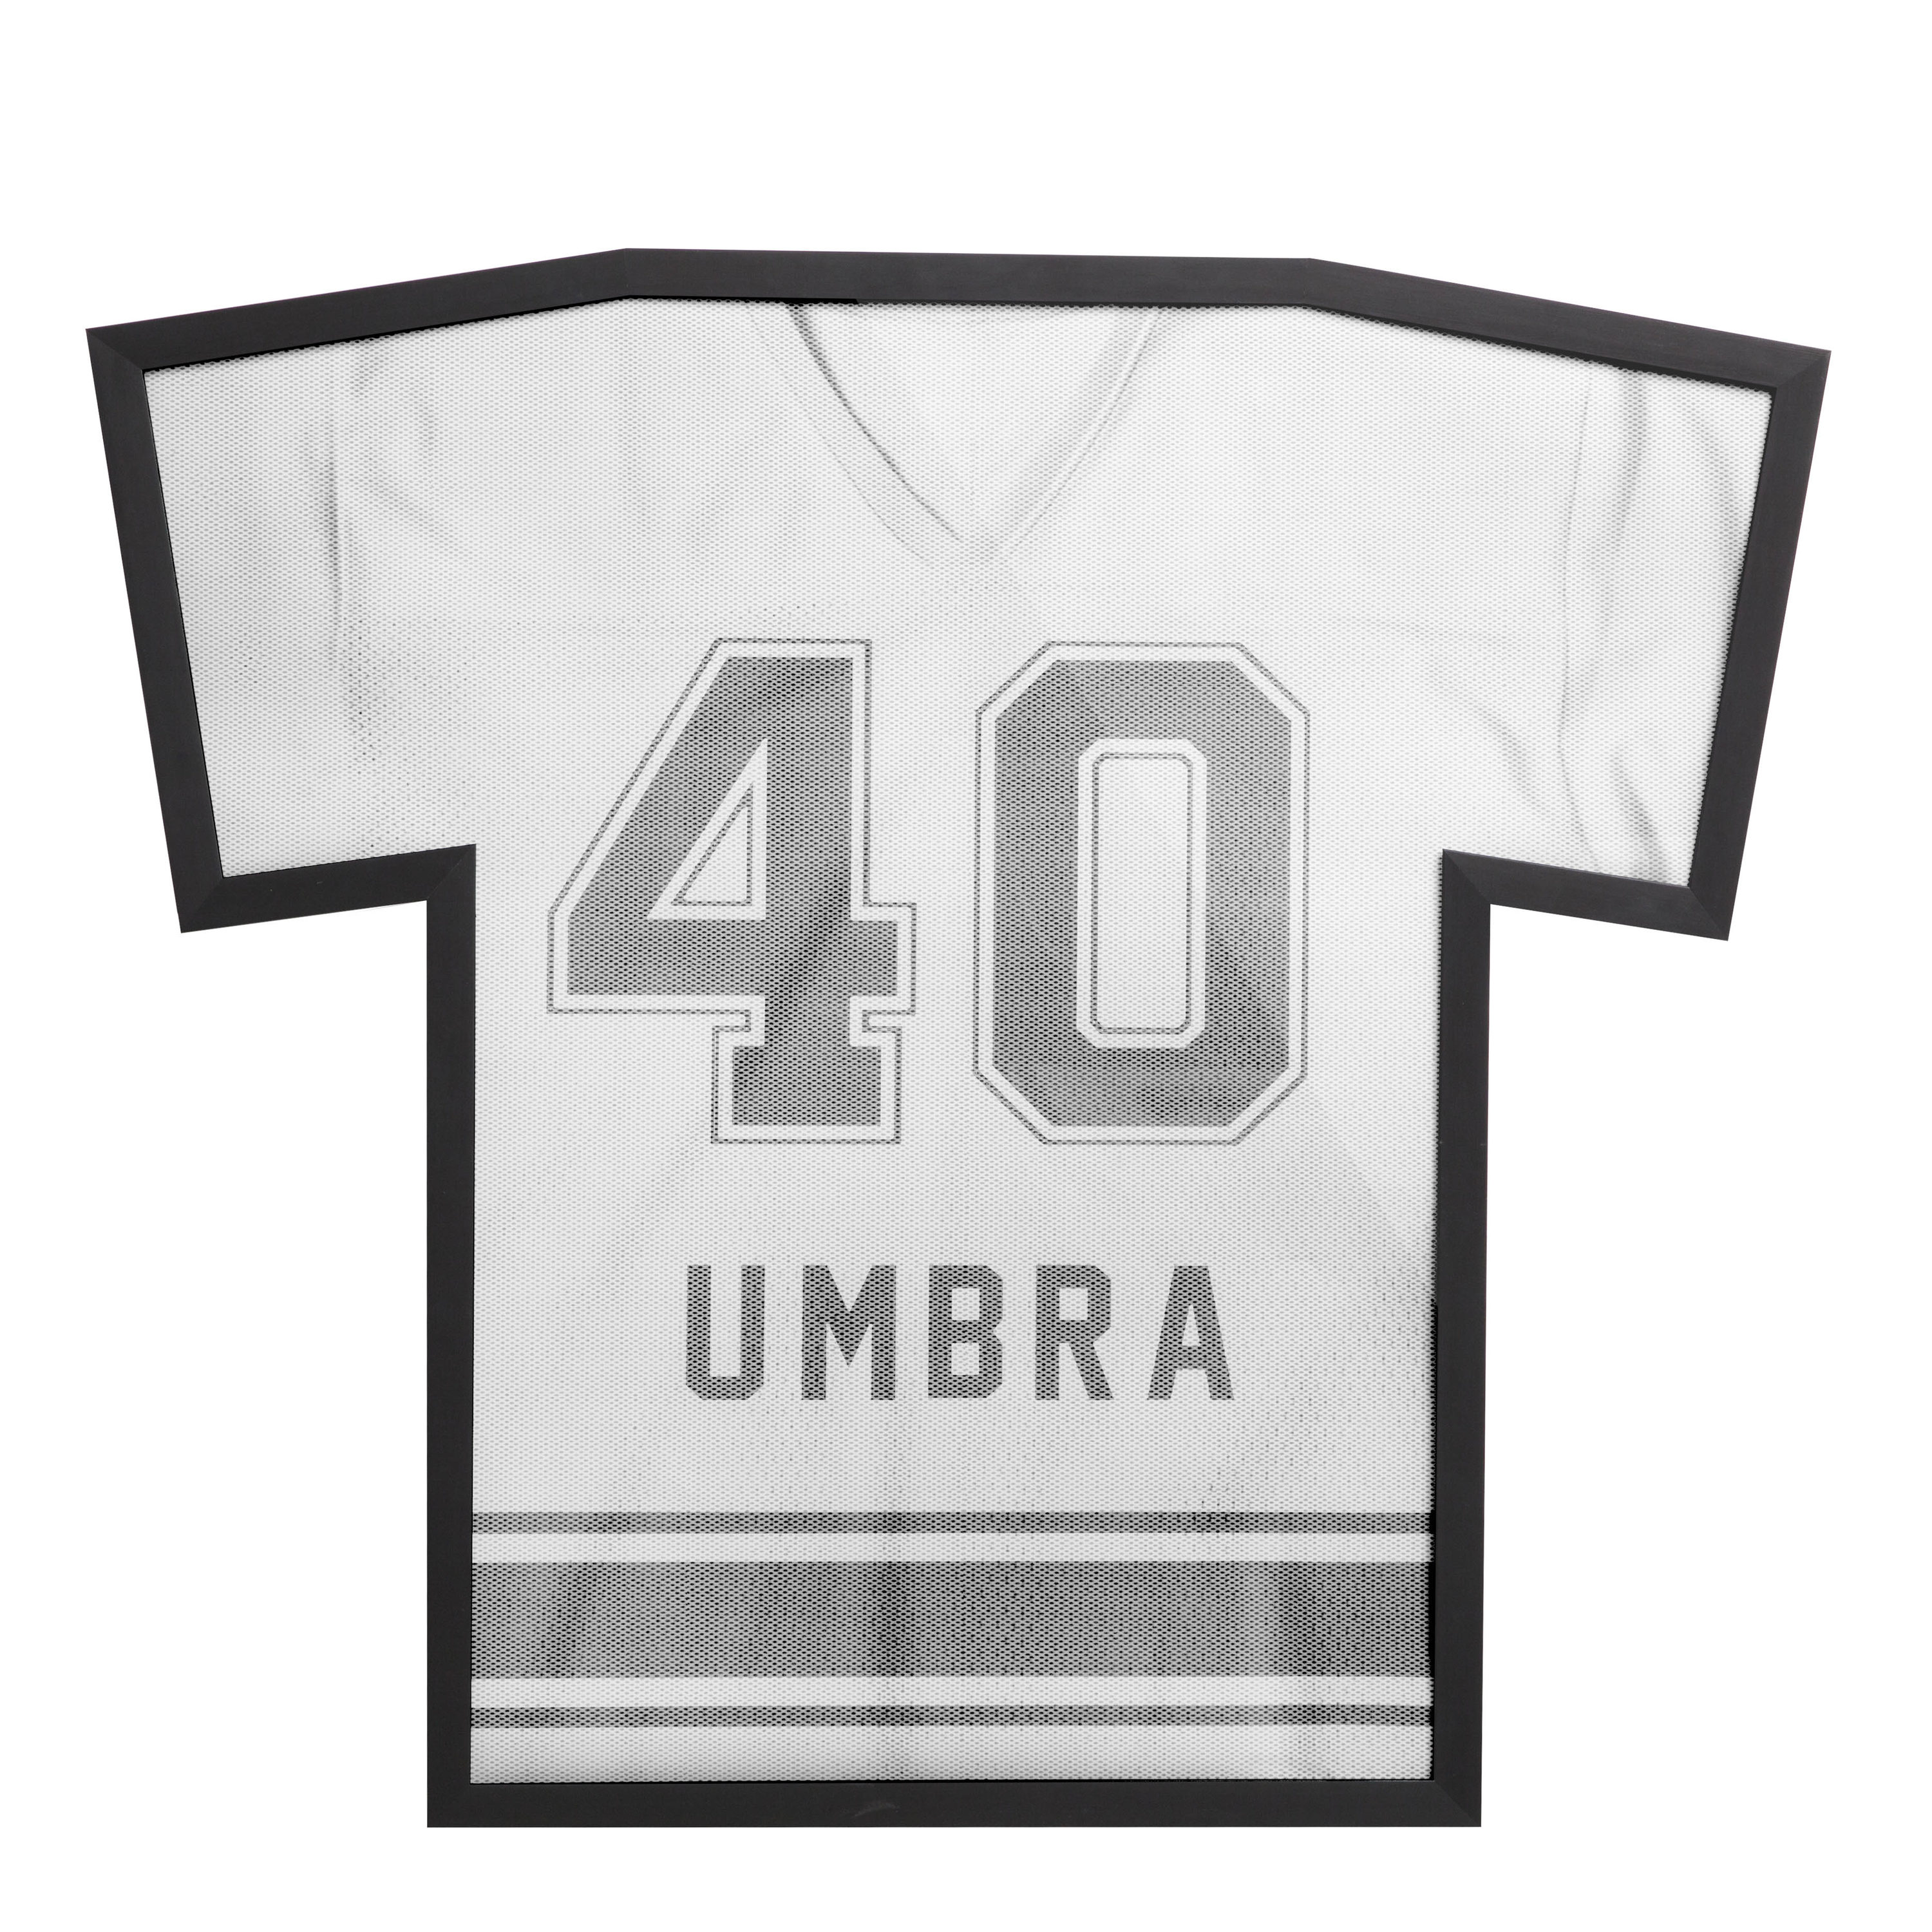 Showcase Your Favorite Jersey with Umbra's T-Frame - Frame for